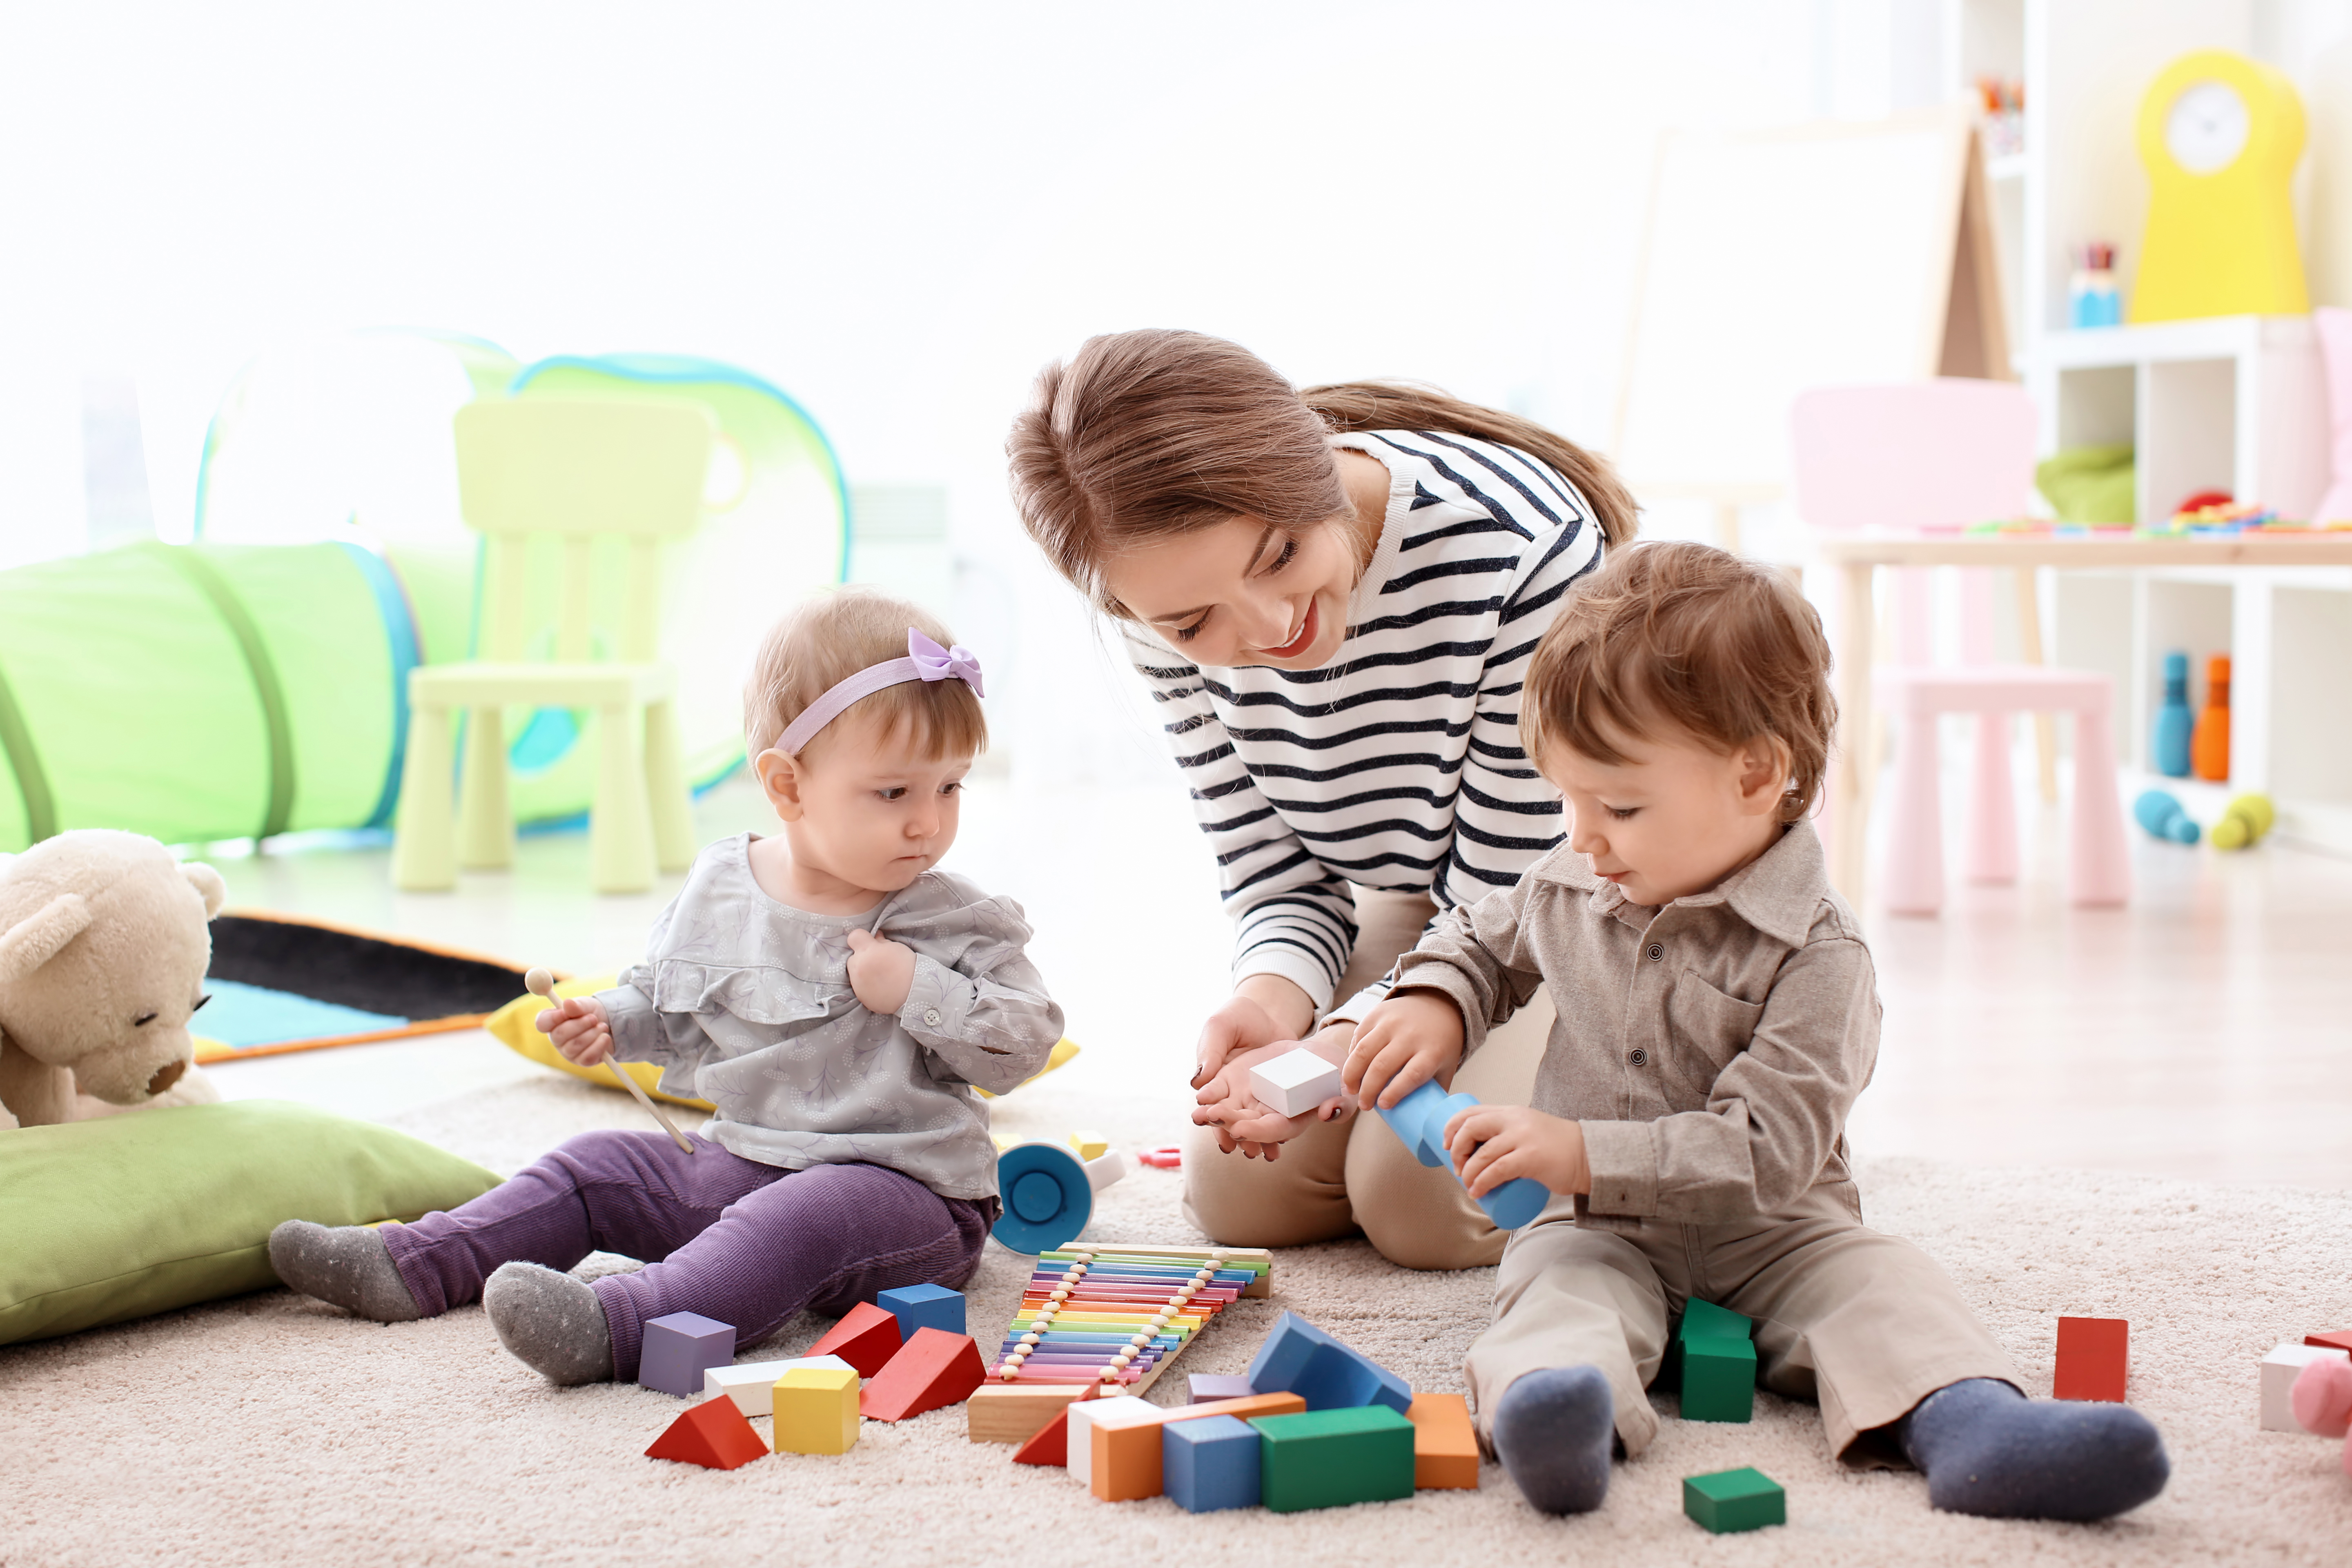 A young woman assisting two toddlers during playtime | Source: Shutterstock